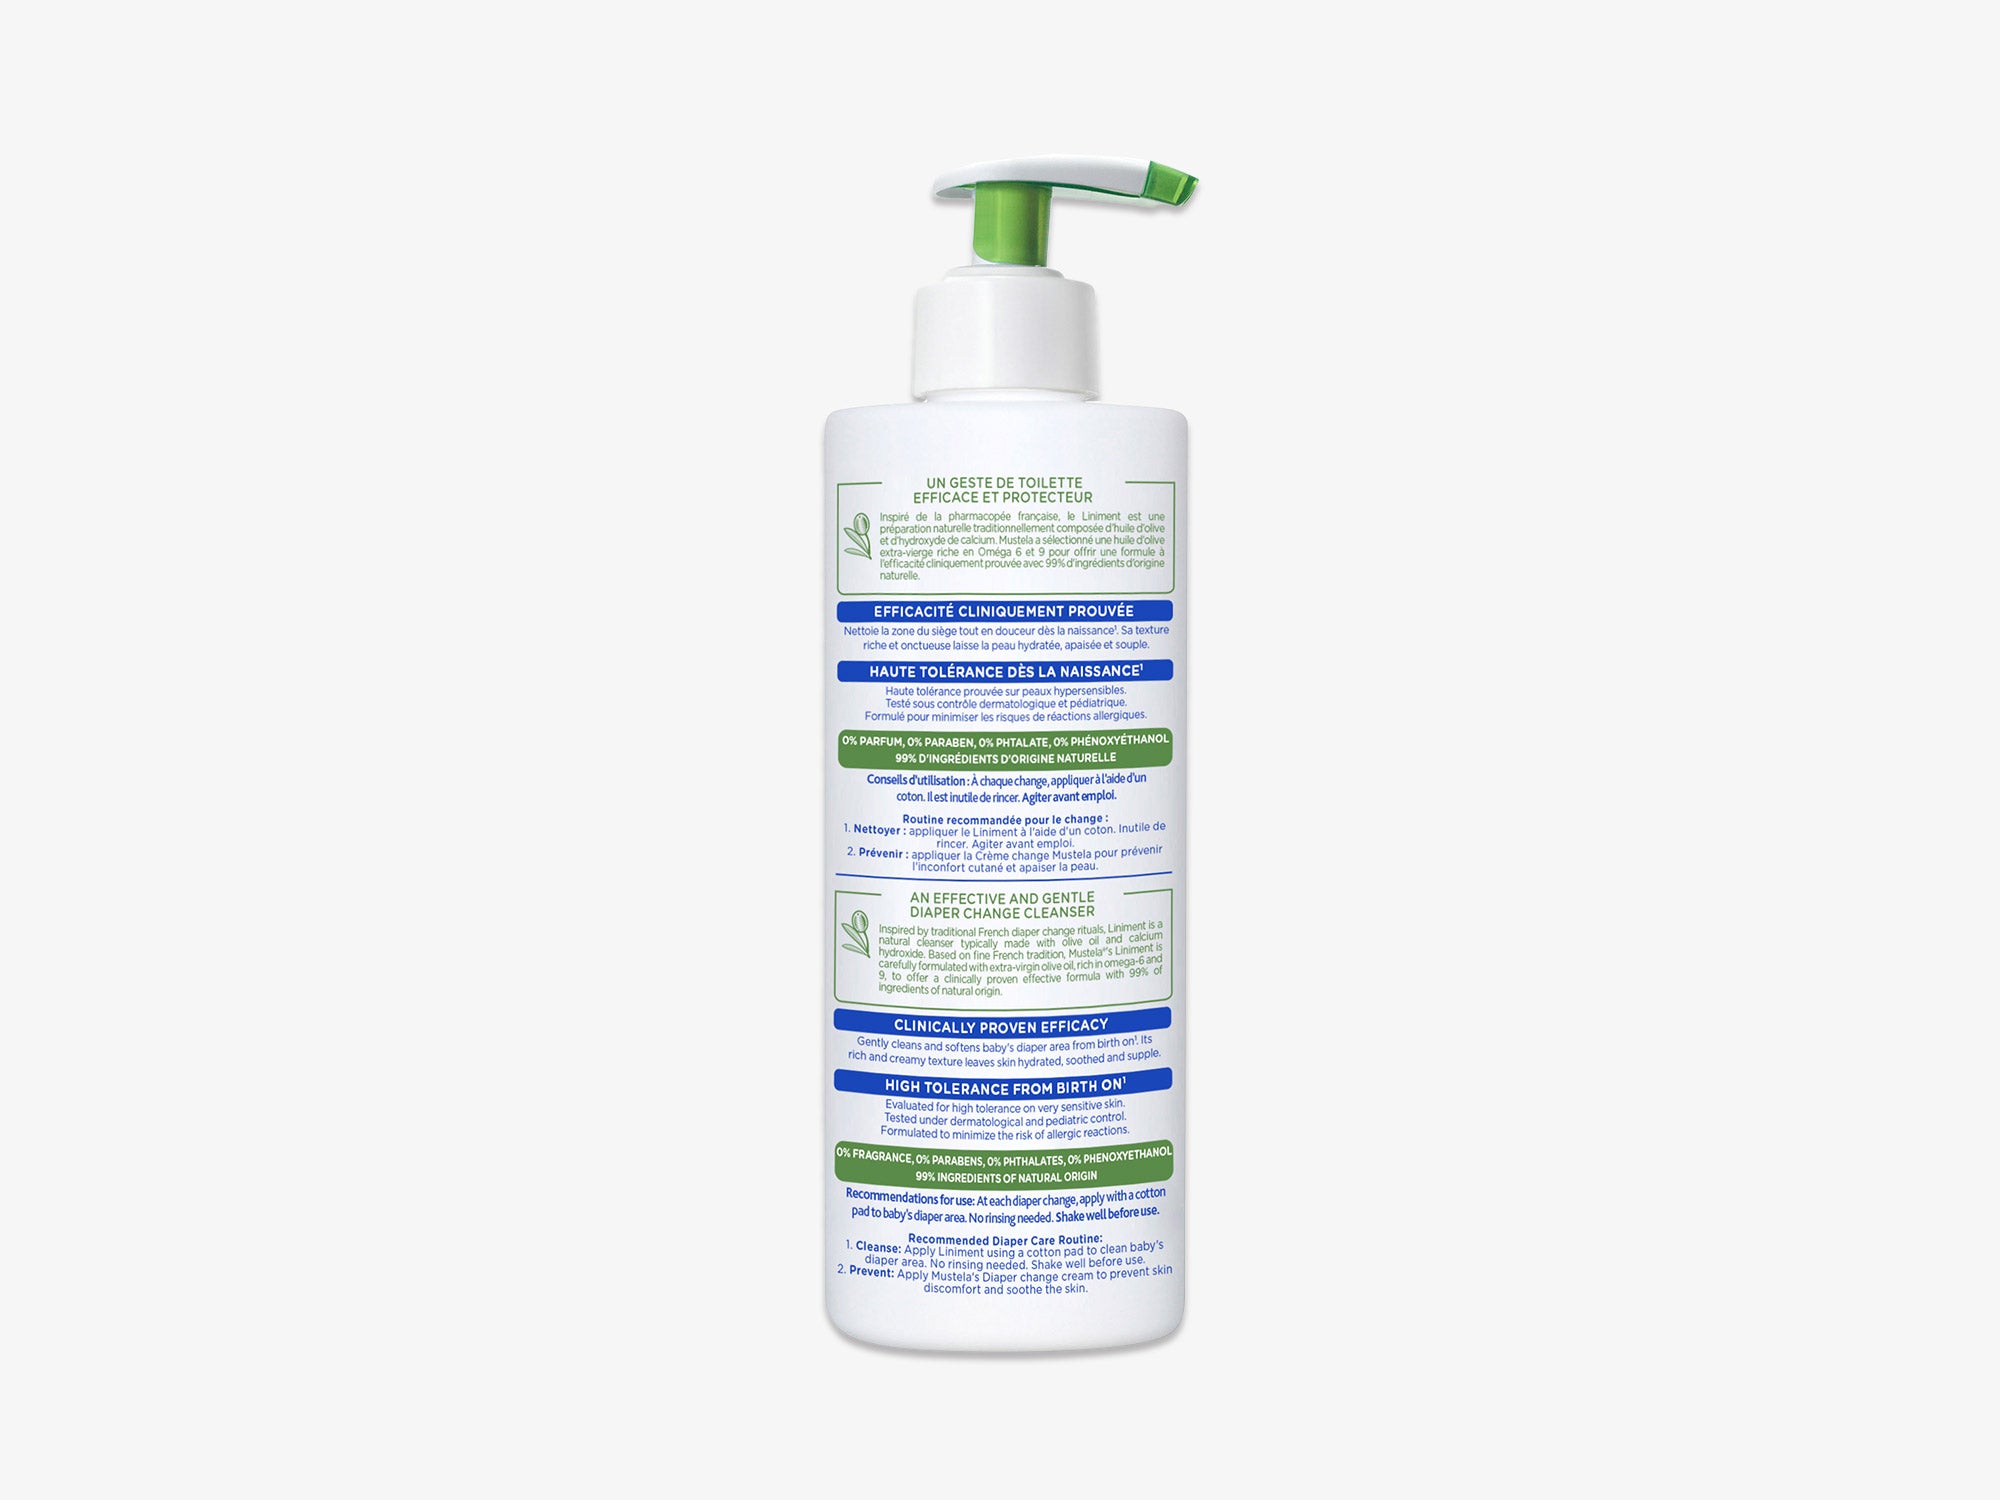 Olive oil/limewater emulsion for nappy changing 480ml- Liniderm